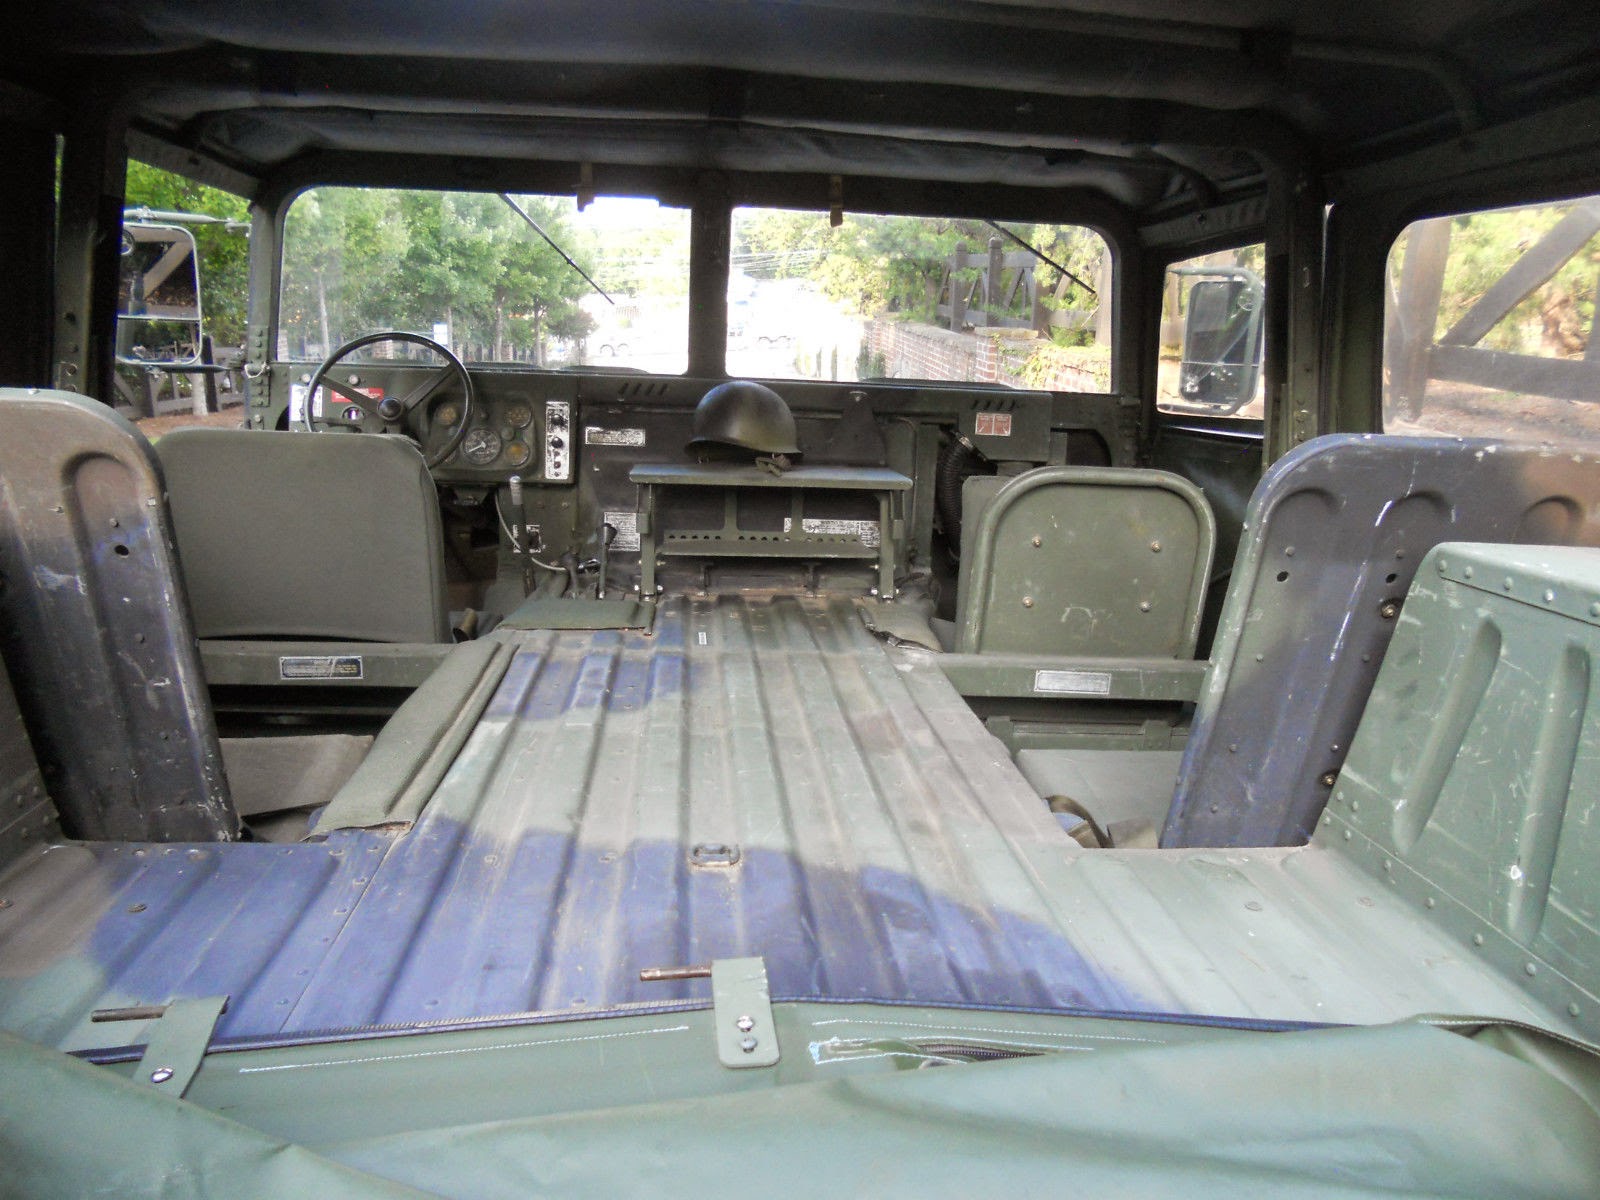 1985 M998 Military Humvee for Sale - 4x4 Cars